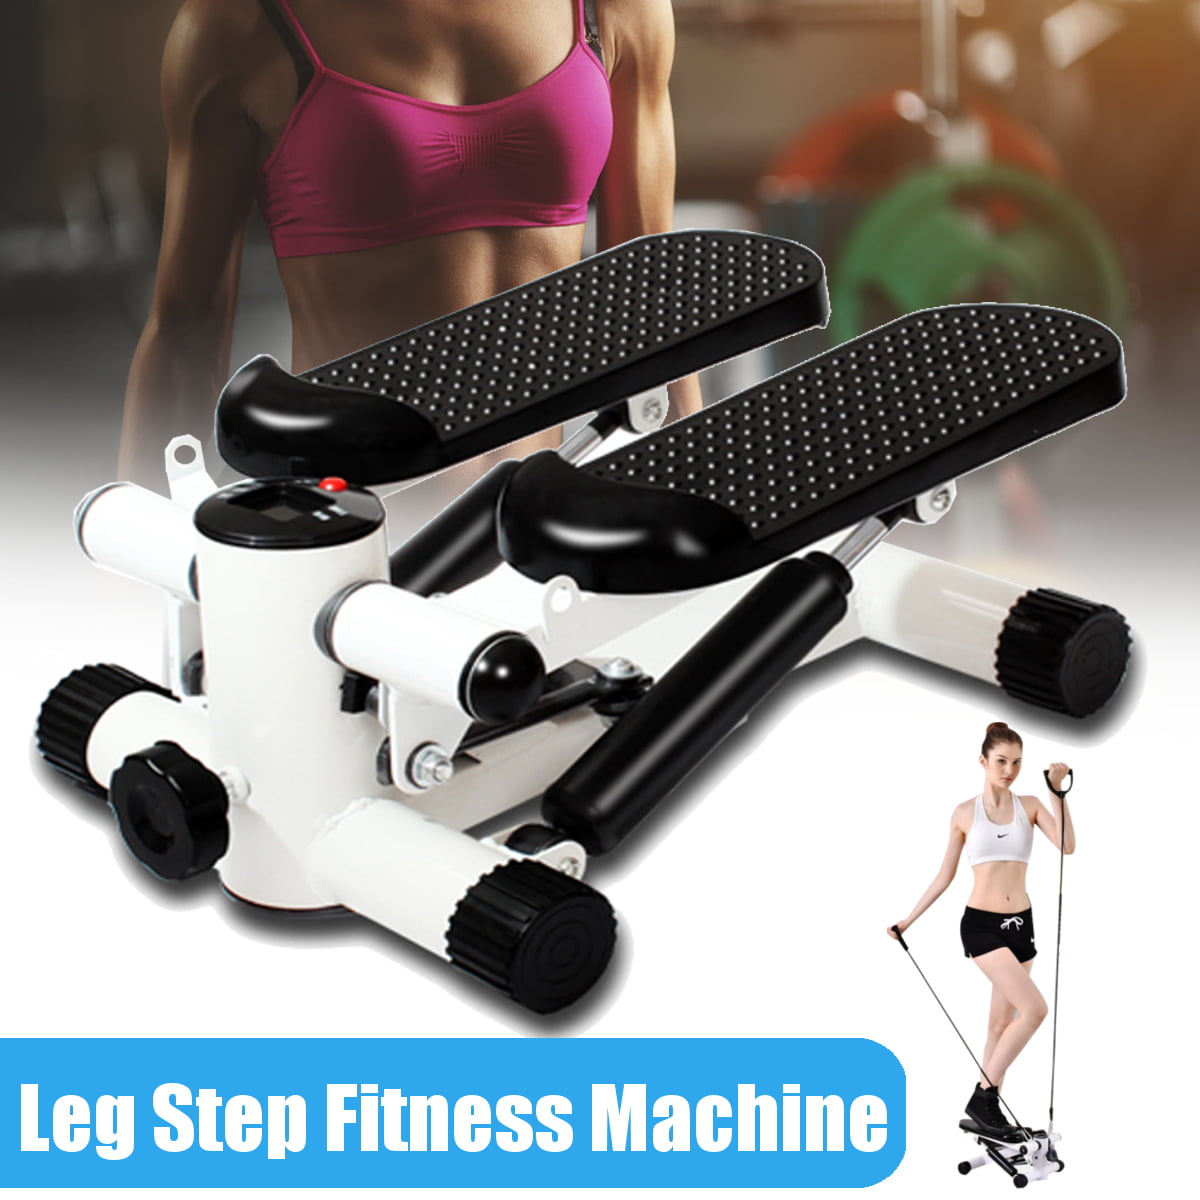 Mini Exercise Stepper Pedal Fitness Cardio Workout Trainer Home Gym Step Machine 